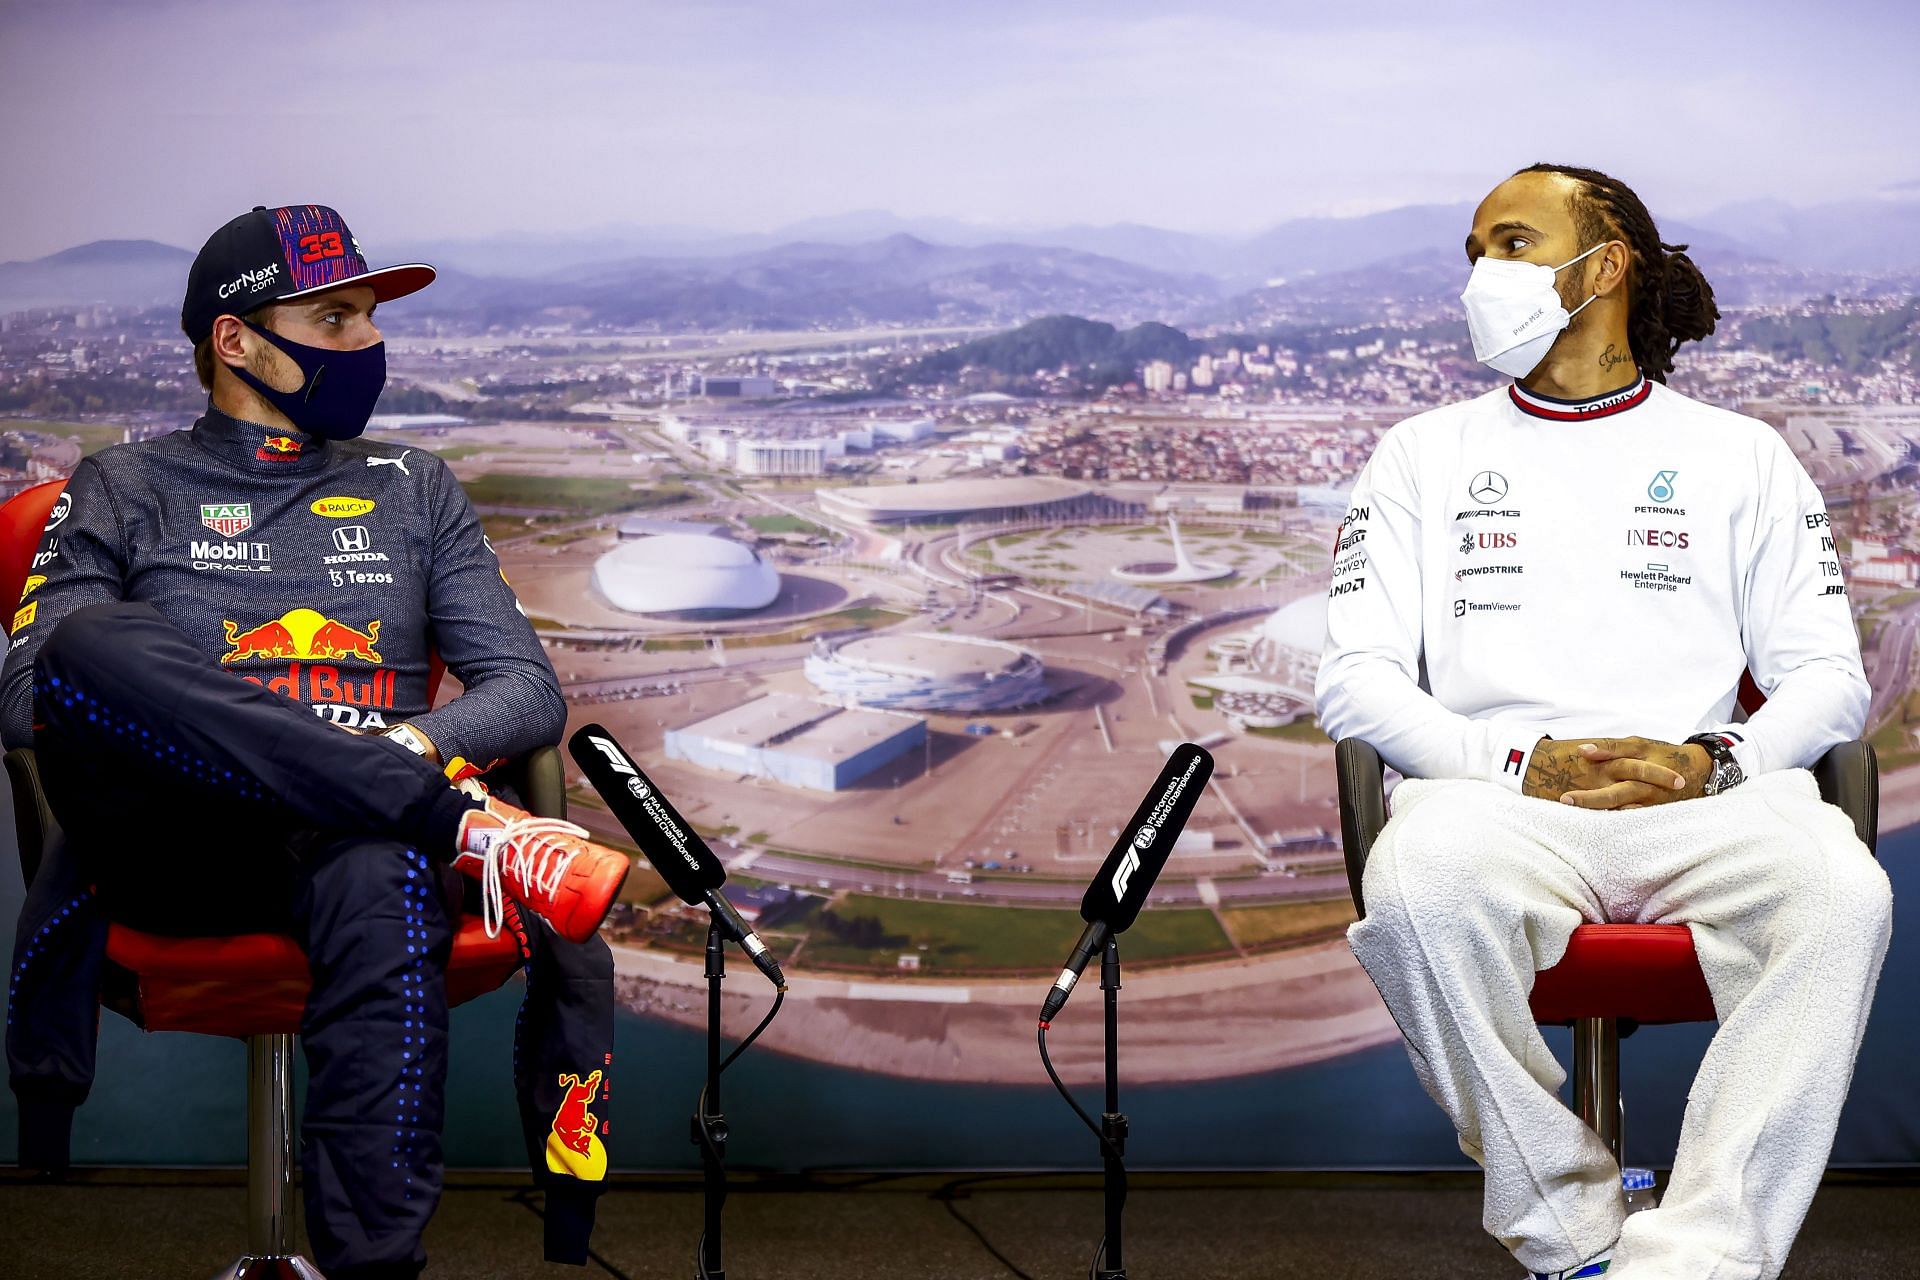 Lewis Hamilton and Max Verstappen have been embroiled in an intense battle all season. Photo: Andy Hone/Getty Images